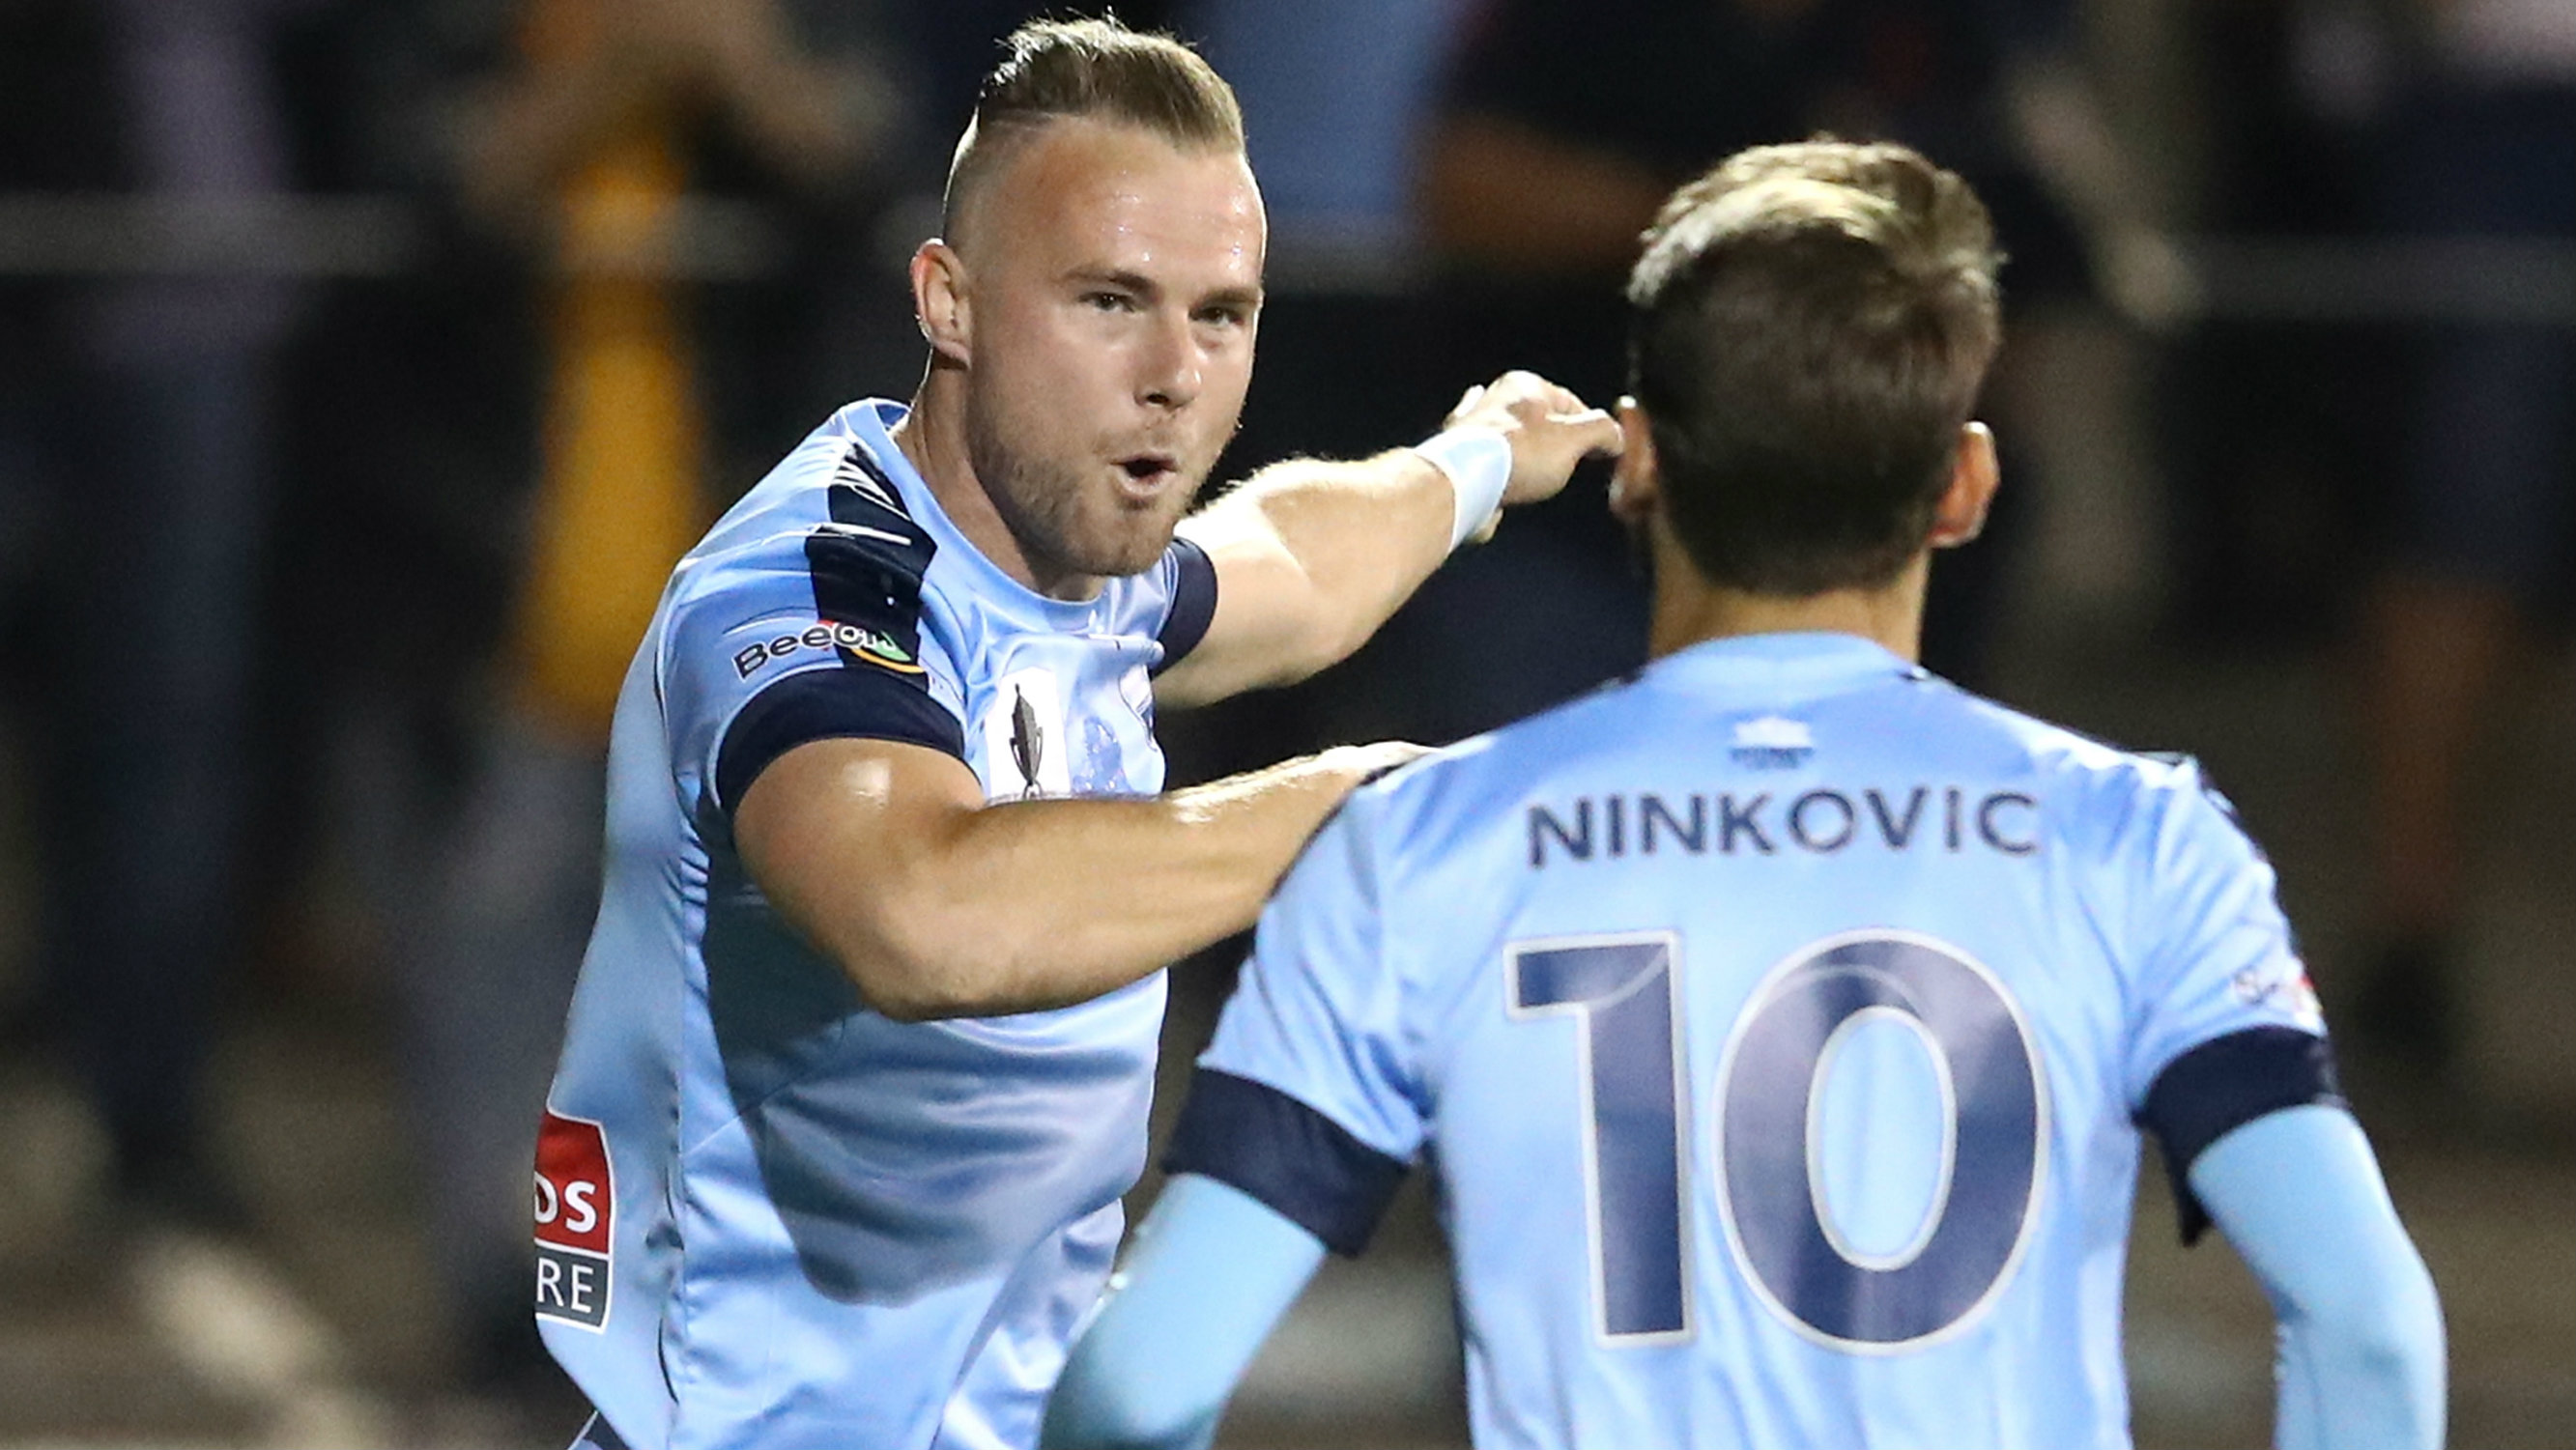 Jordy Buijs fired Sydney FC ahead against Melbourne City with a stunning free kick.